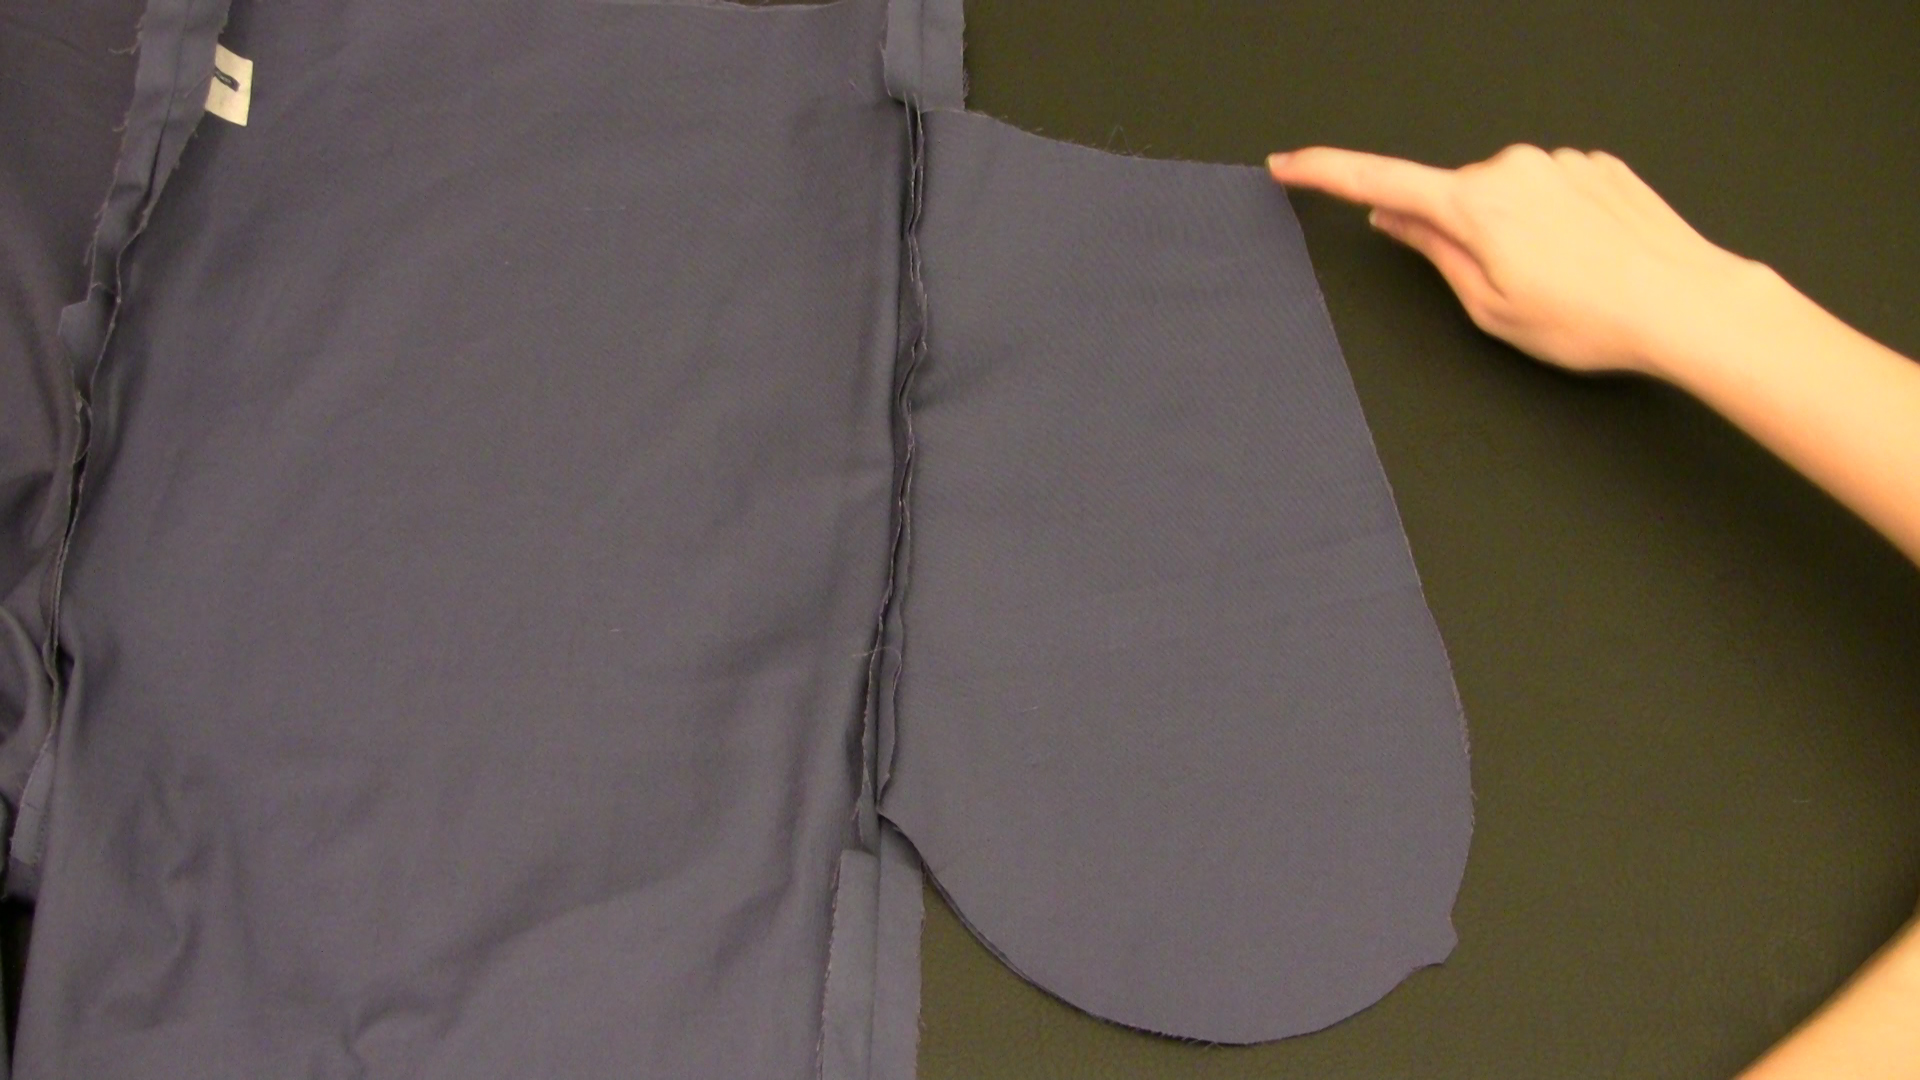 How to Sew Pockets: A Tutorial | Craftsy